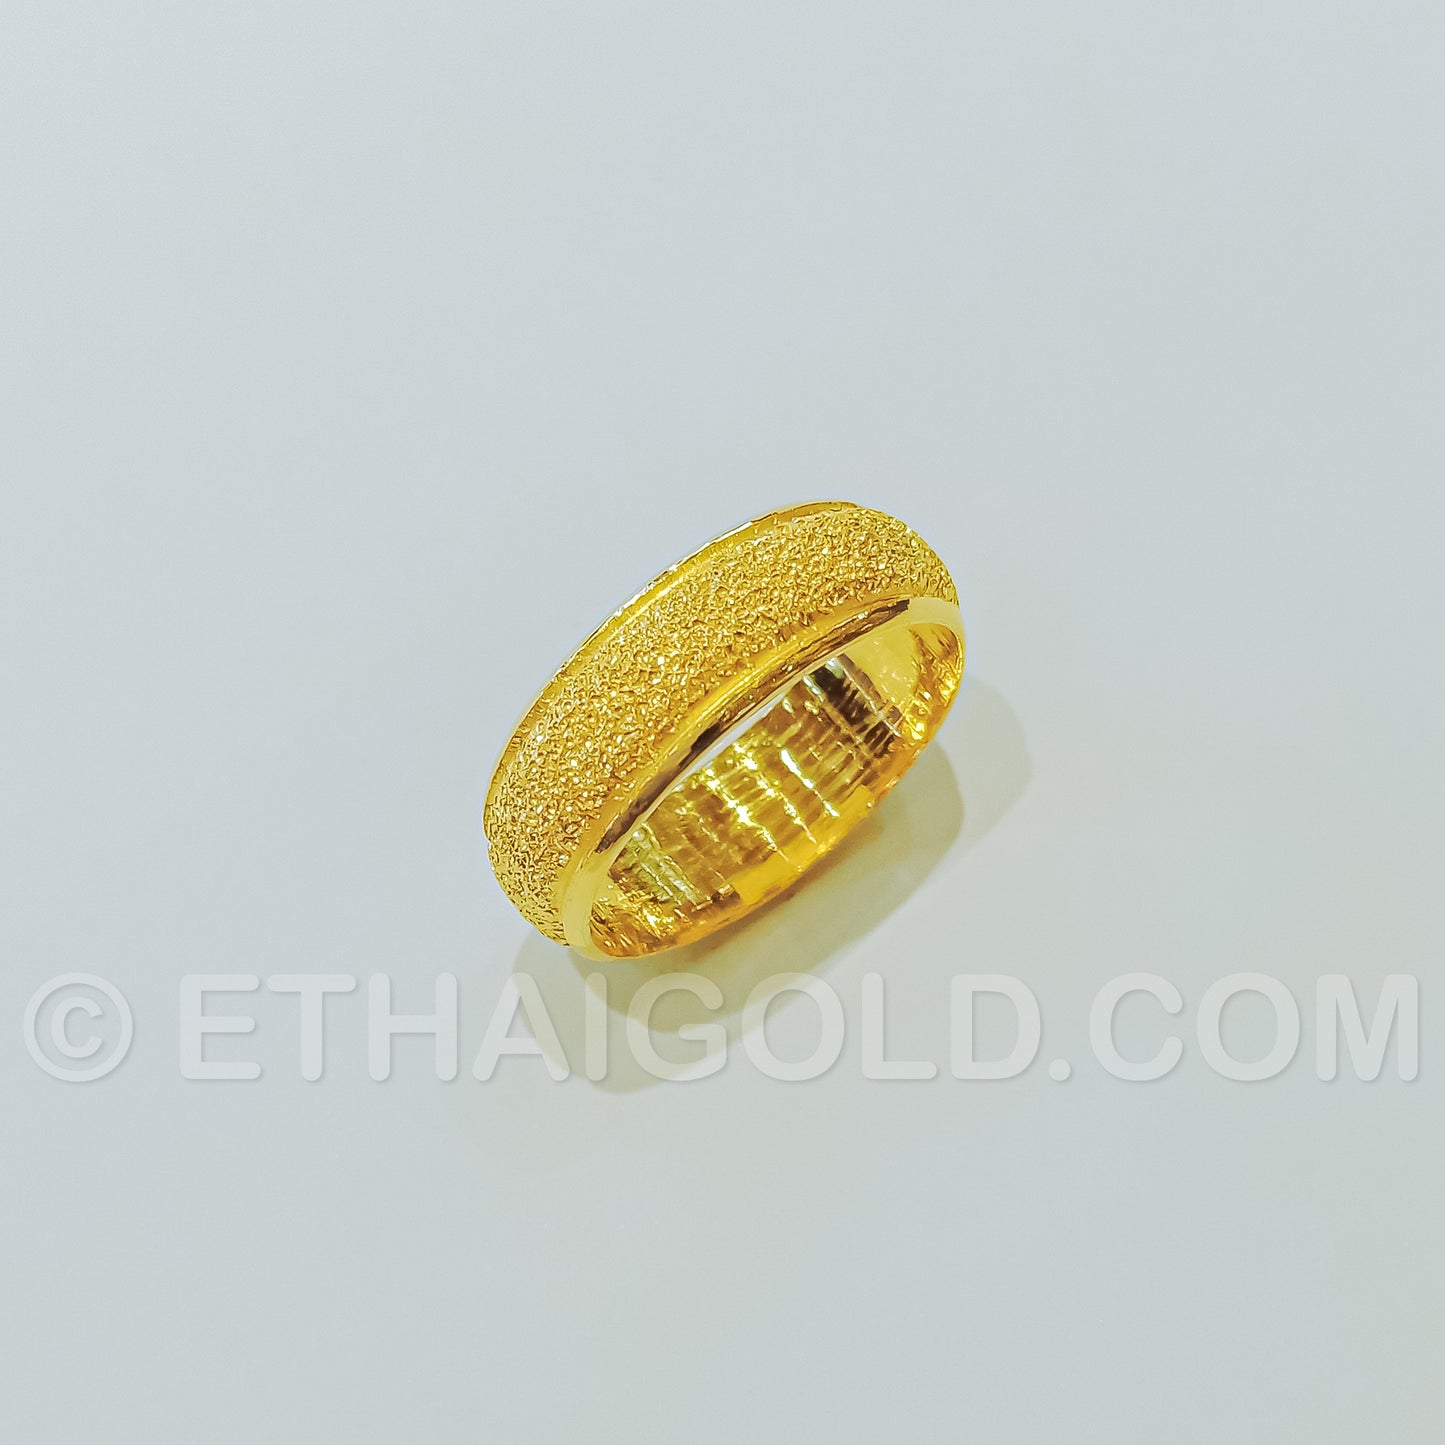 1/8 BAHT POLISHED SPARKLING SOLID DOMED WEDDING BAND RING IN 23K GOLD (ID: R020HS)